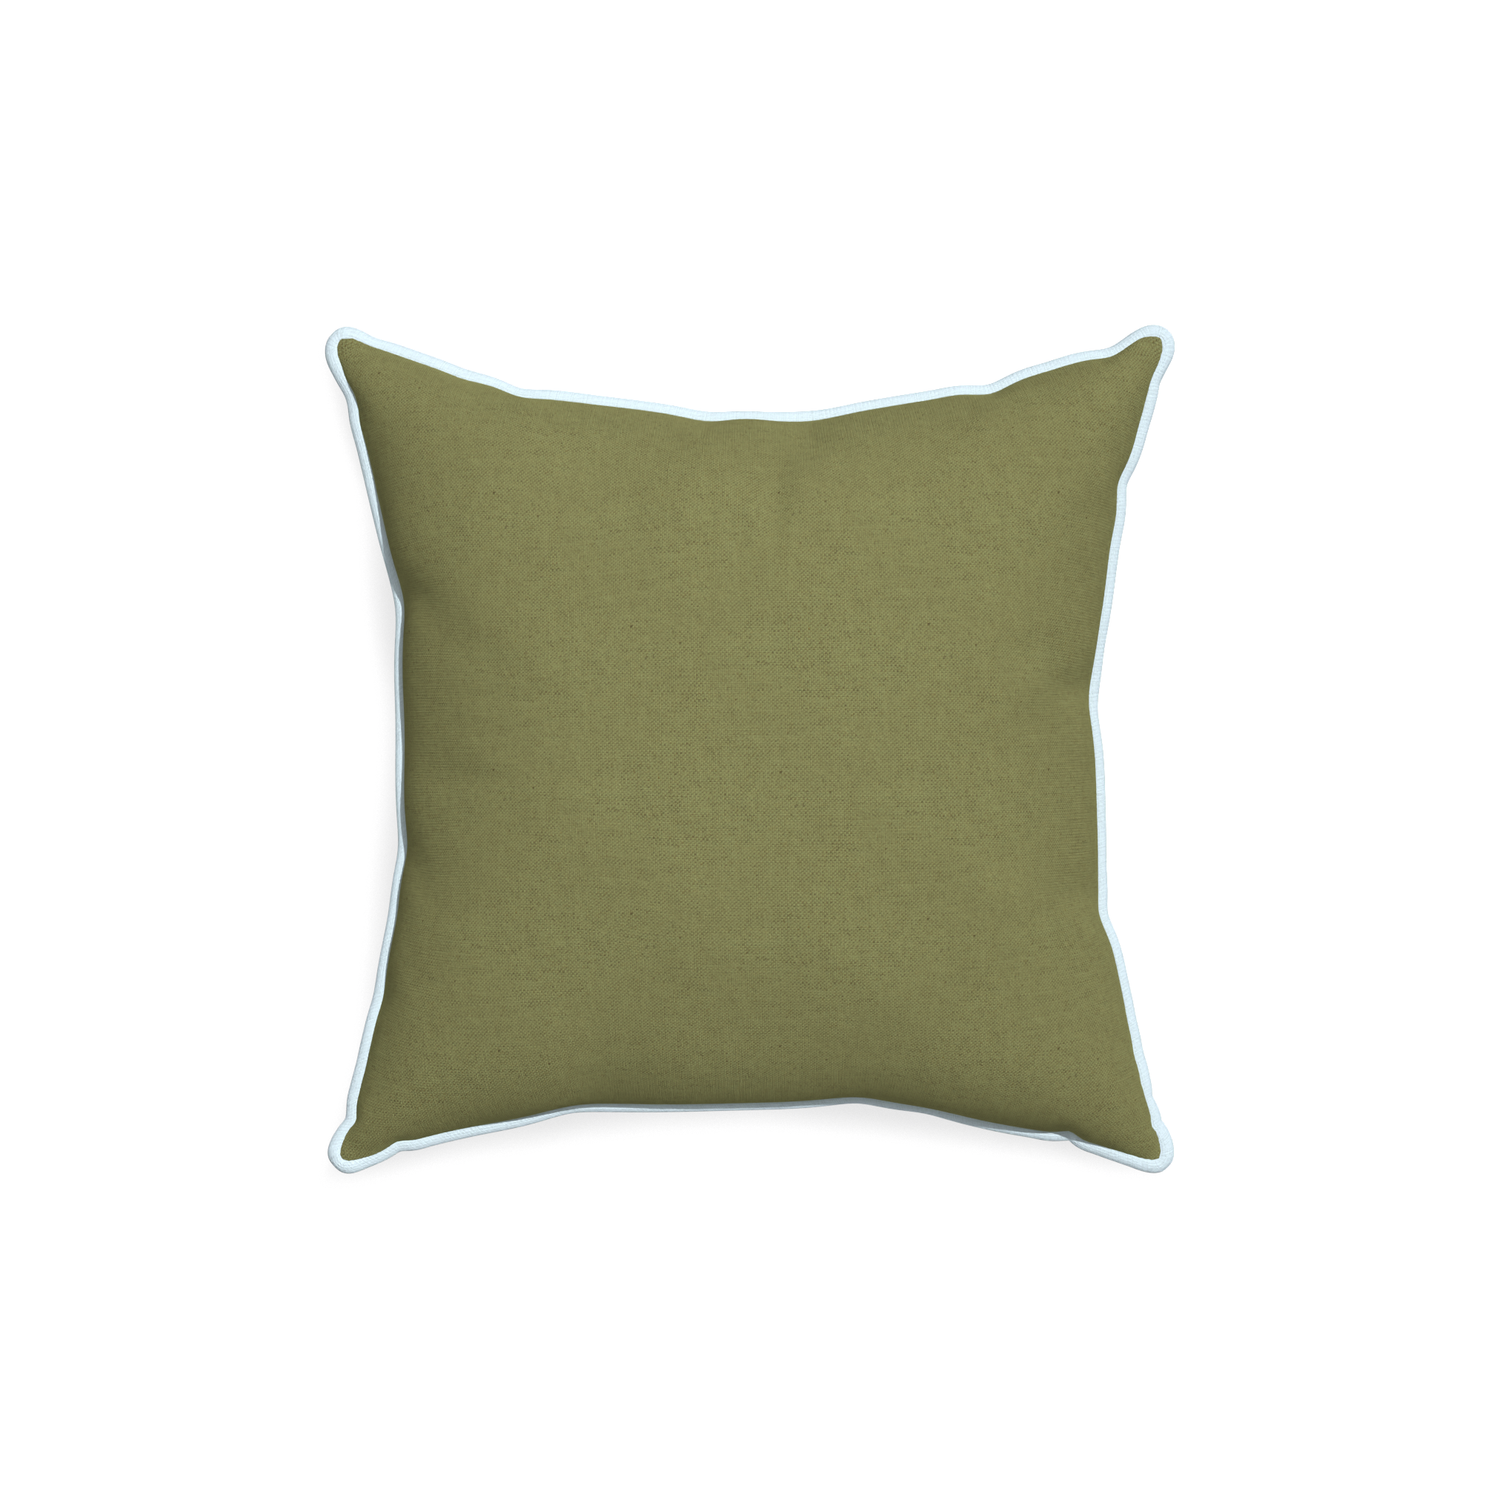 18-square moss custom moss greenpillow with powder piping on white background